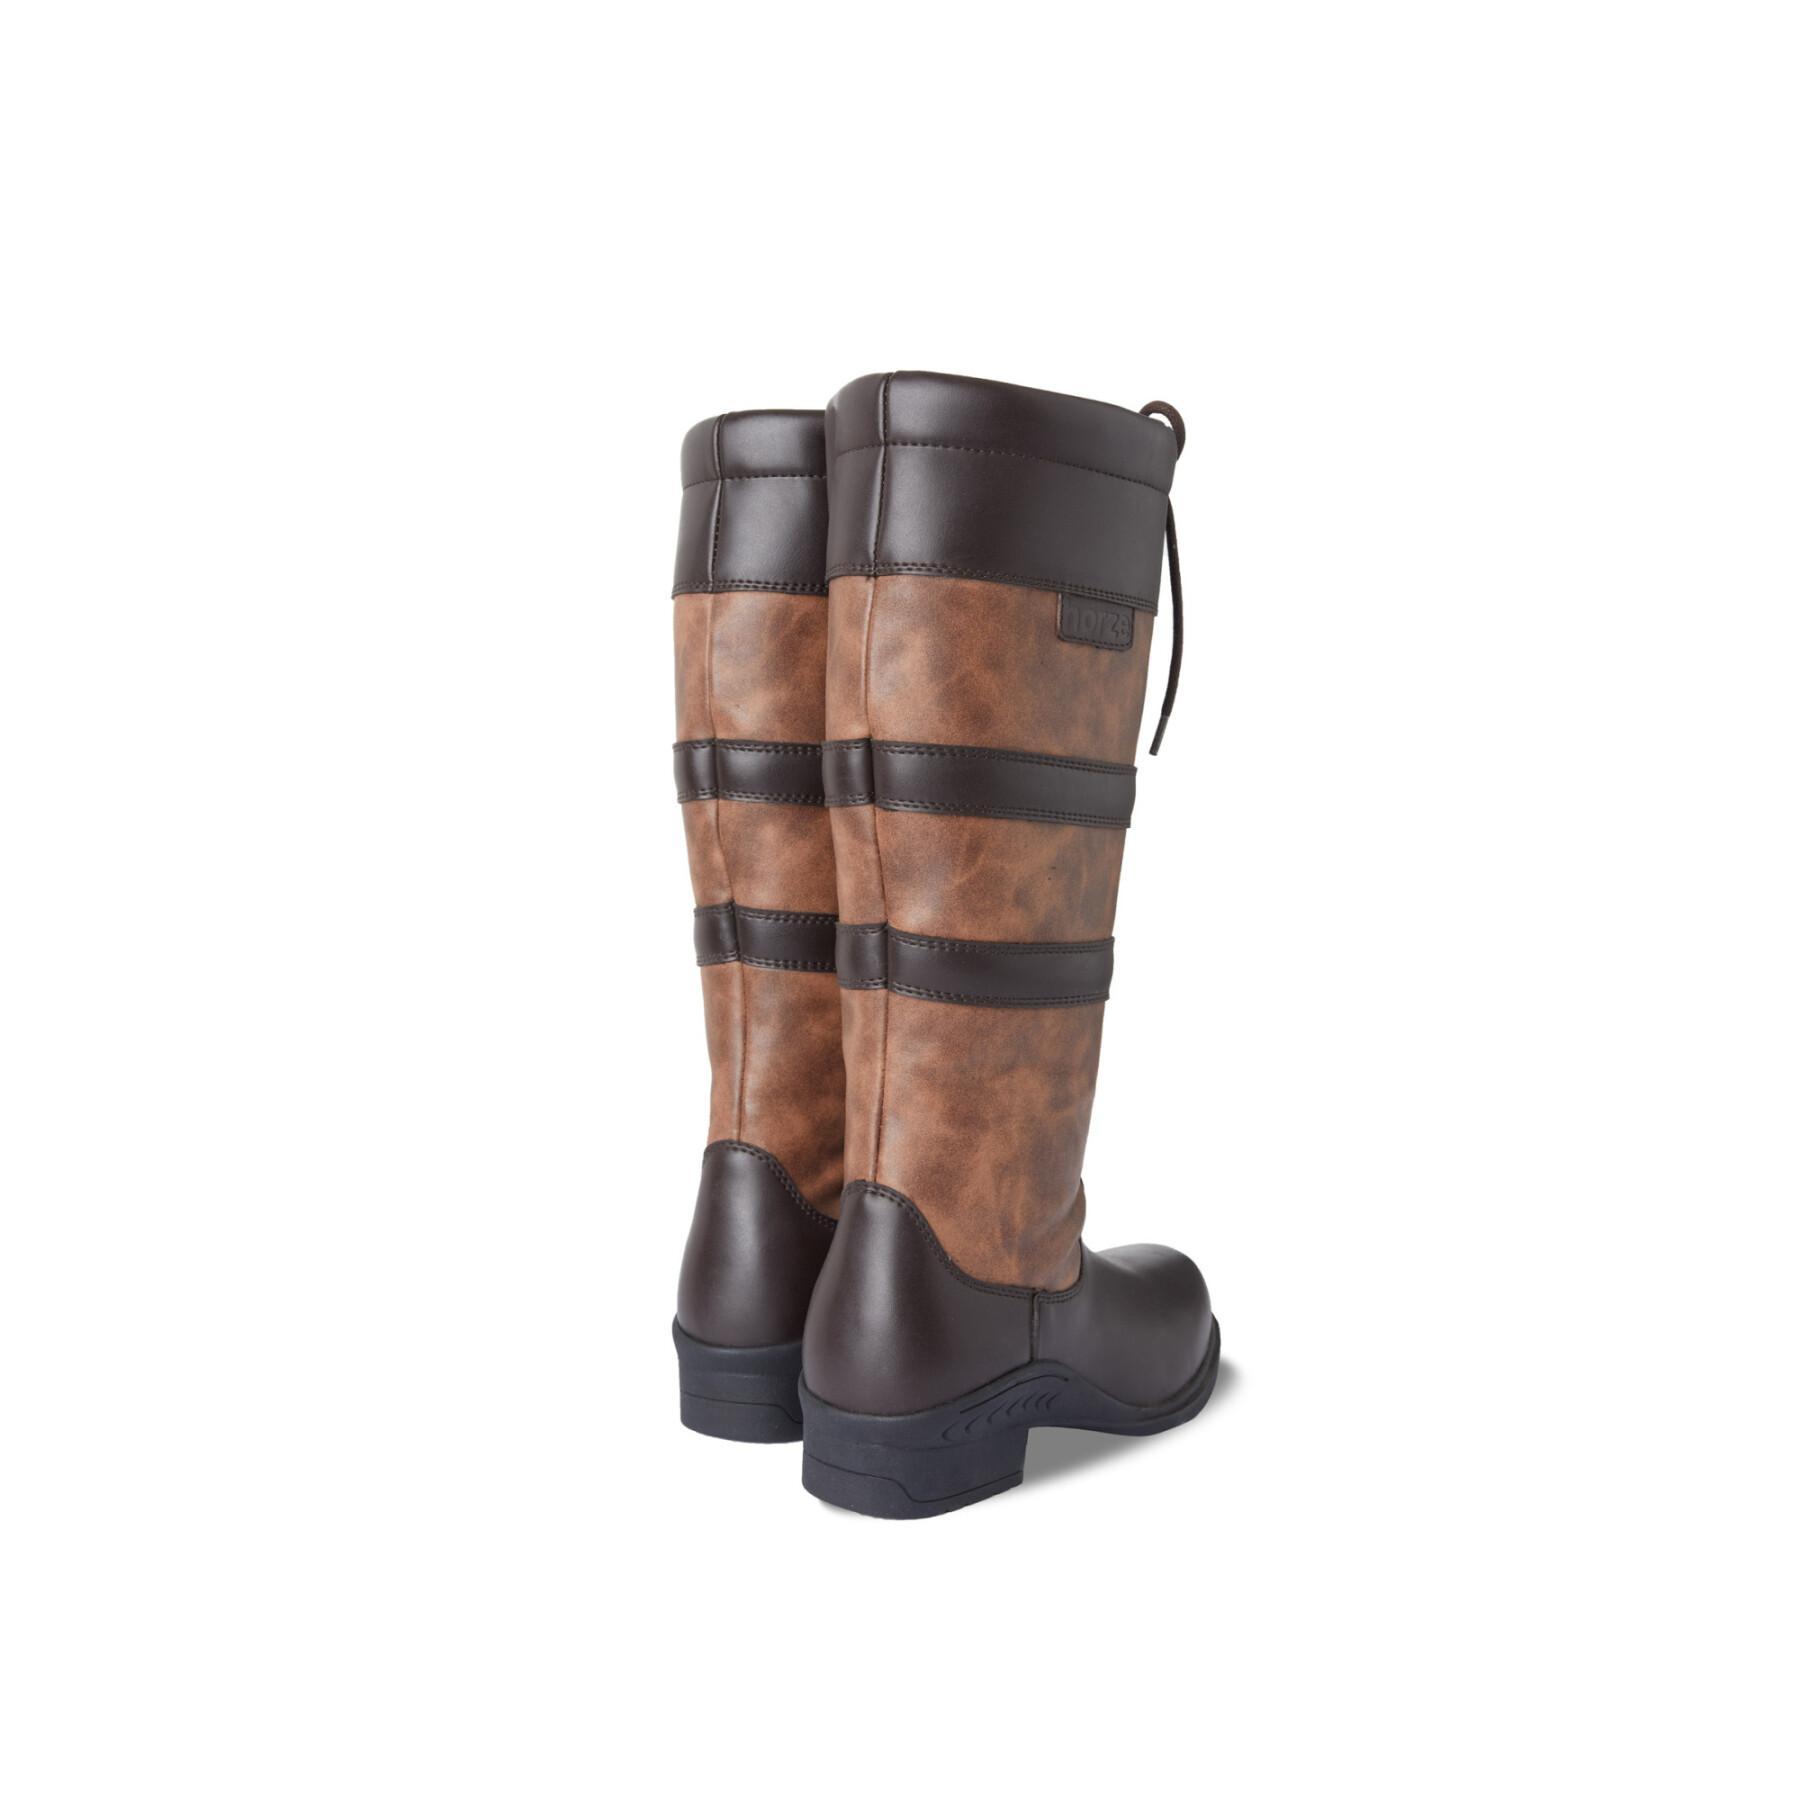 Riding boots for children Horze Country